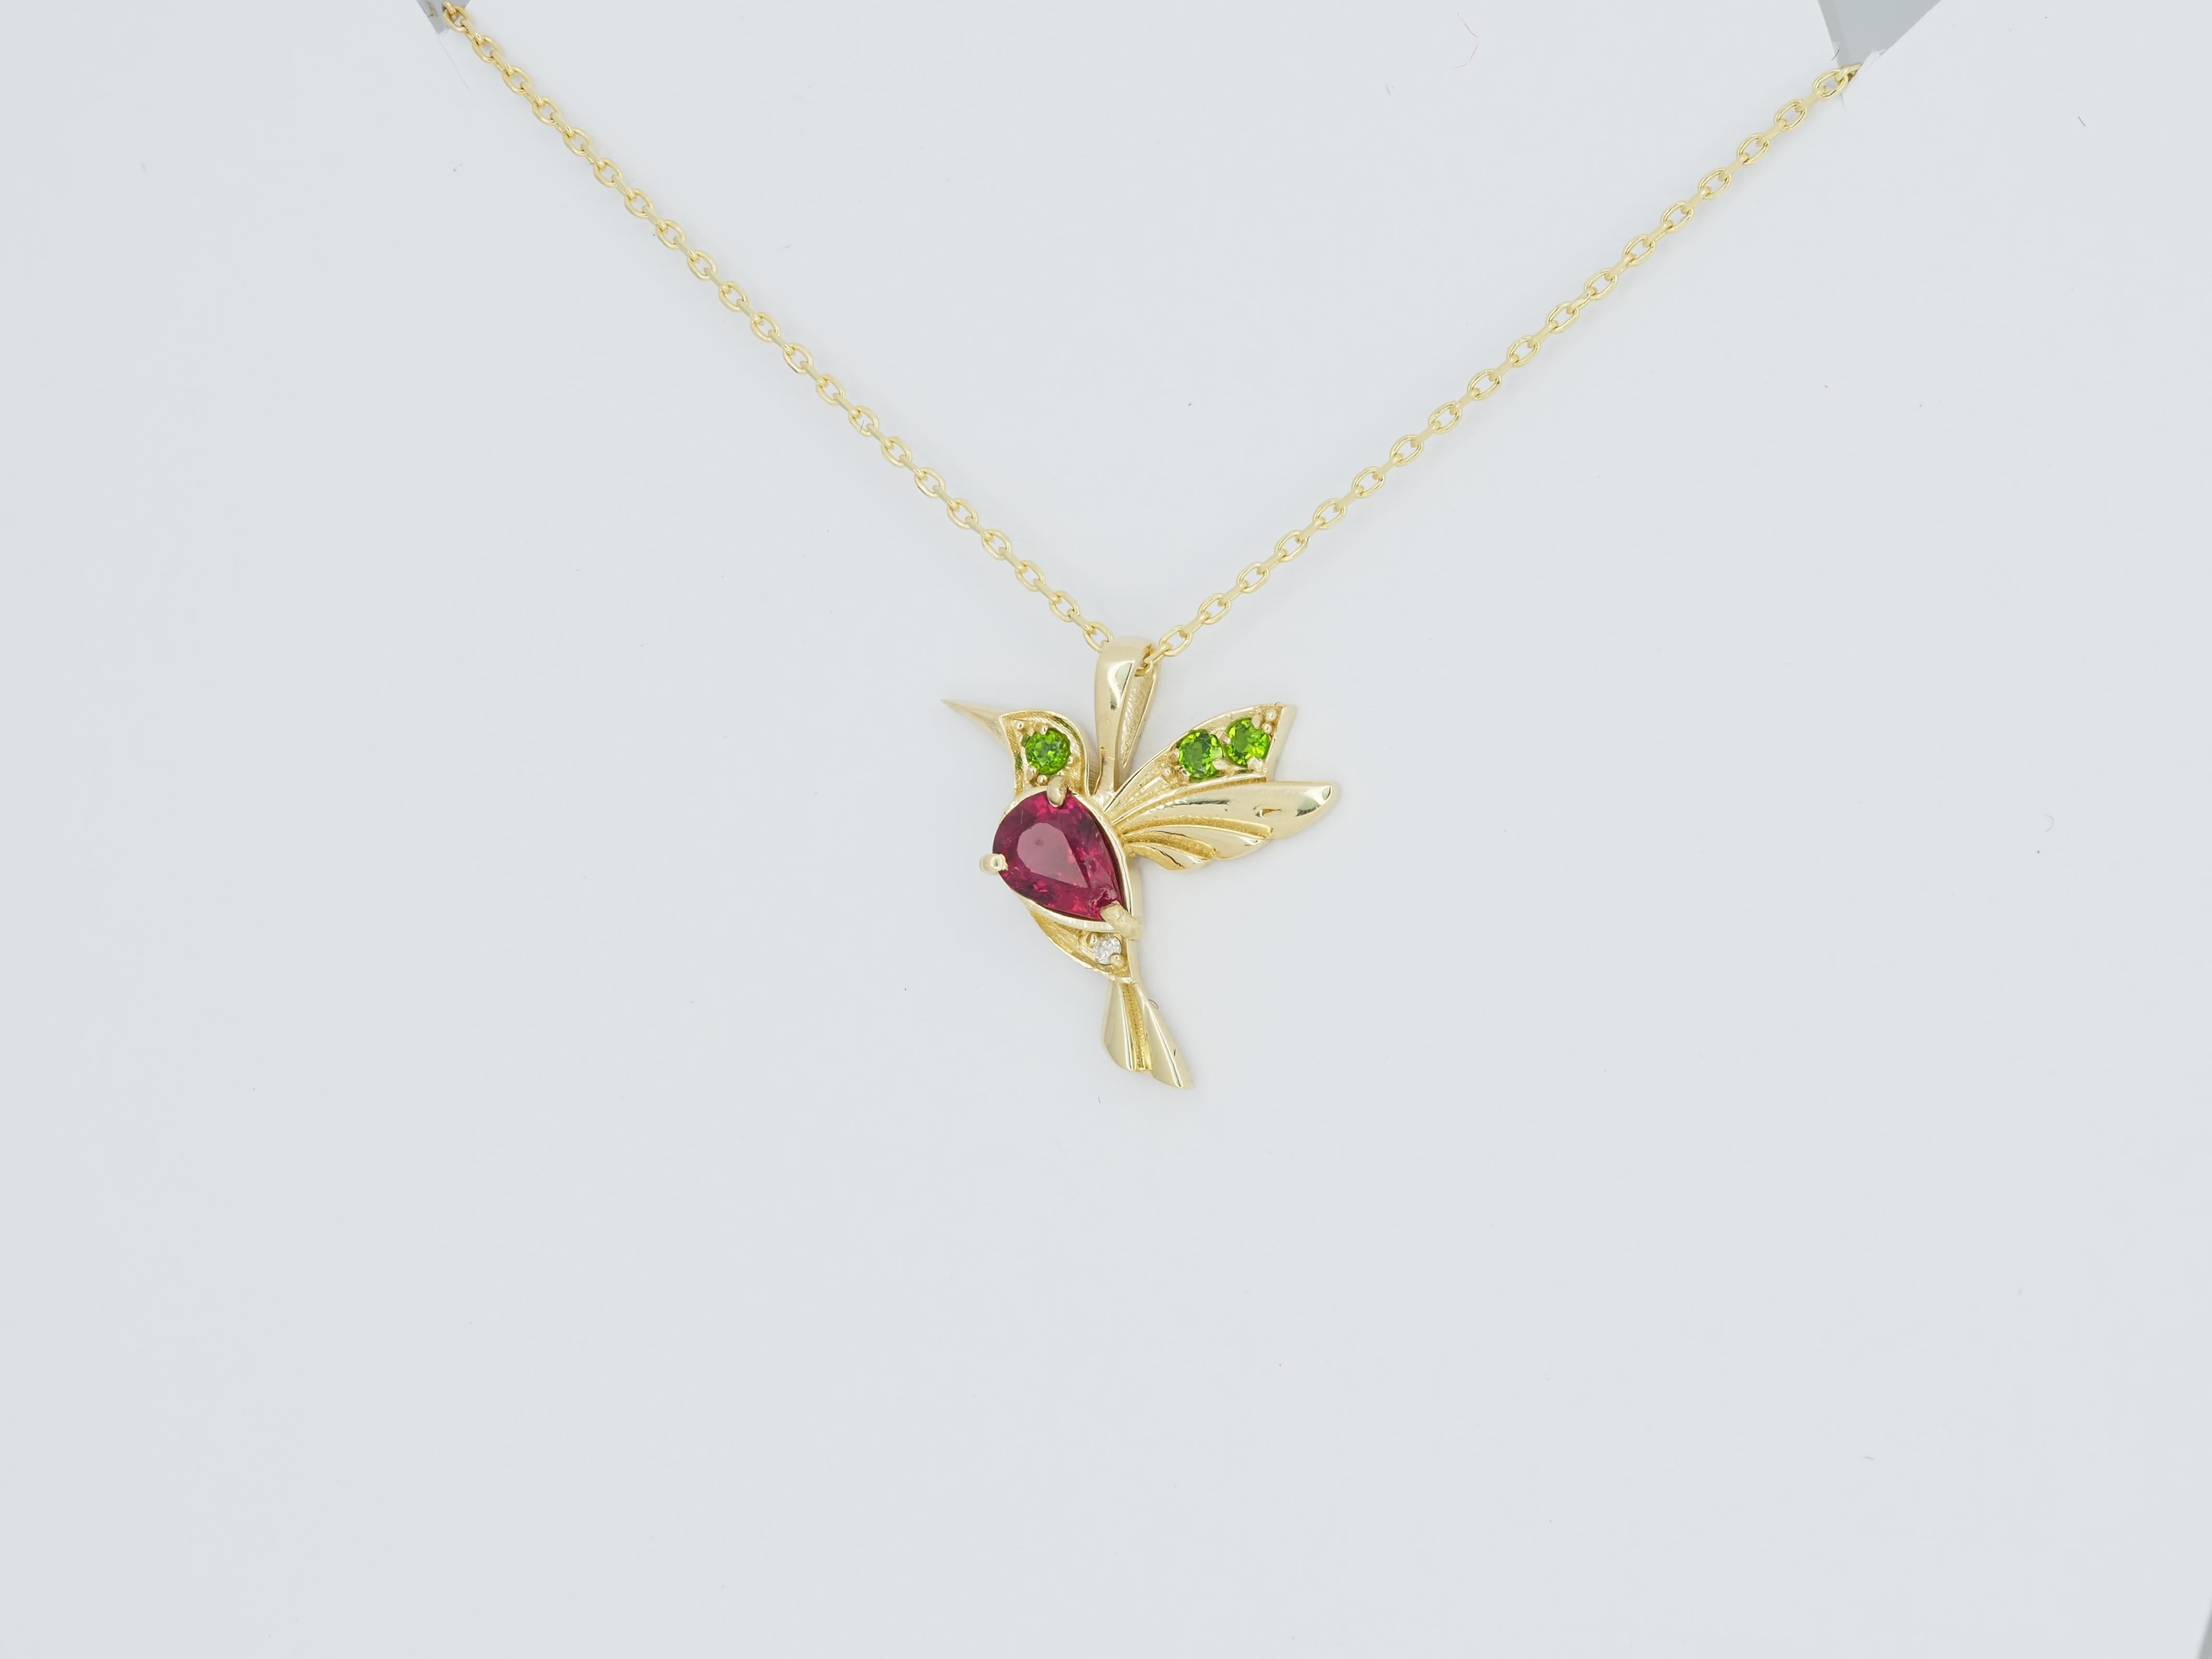 Women's 14k Gold Hummingbird Pendant with Rubies, Bird Pendant with Colored Gemstones For Sale